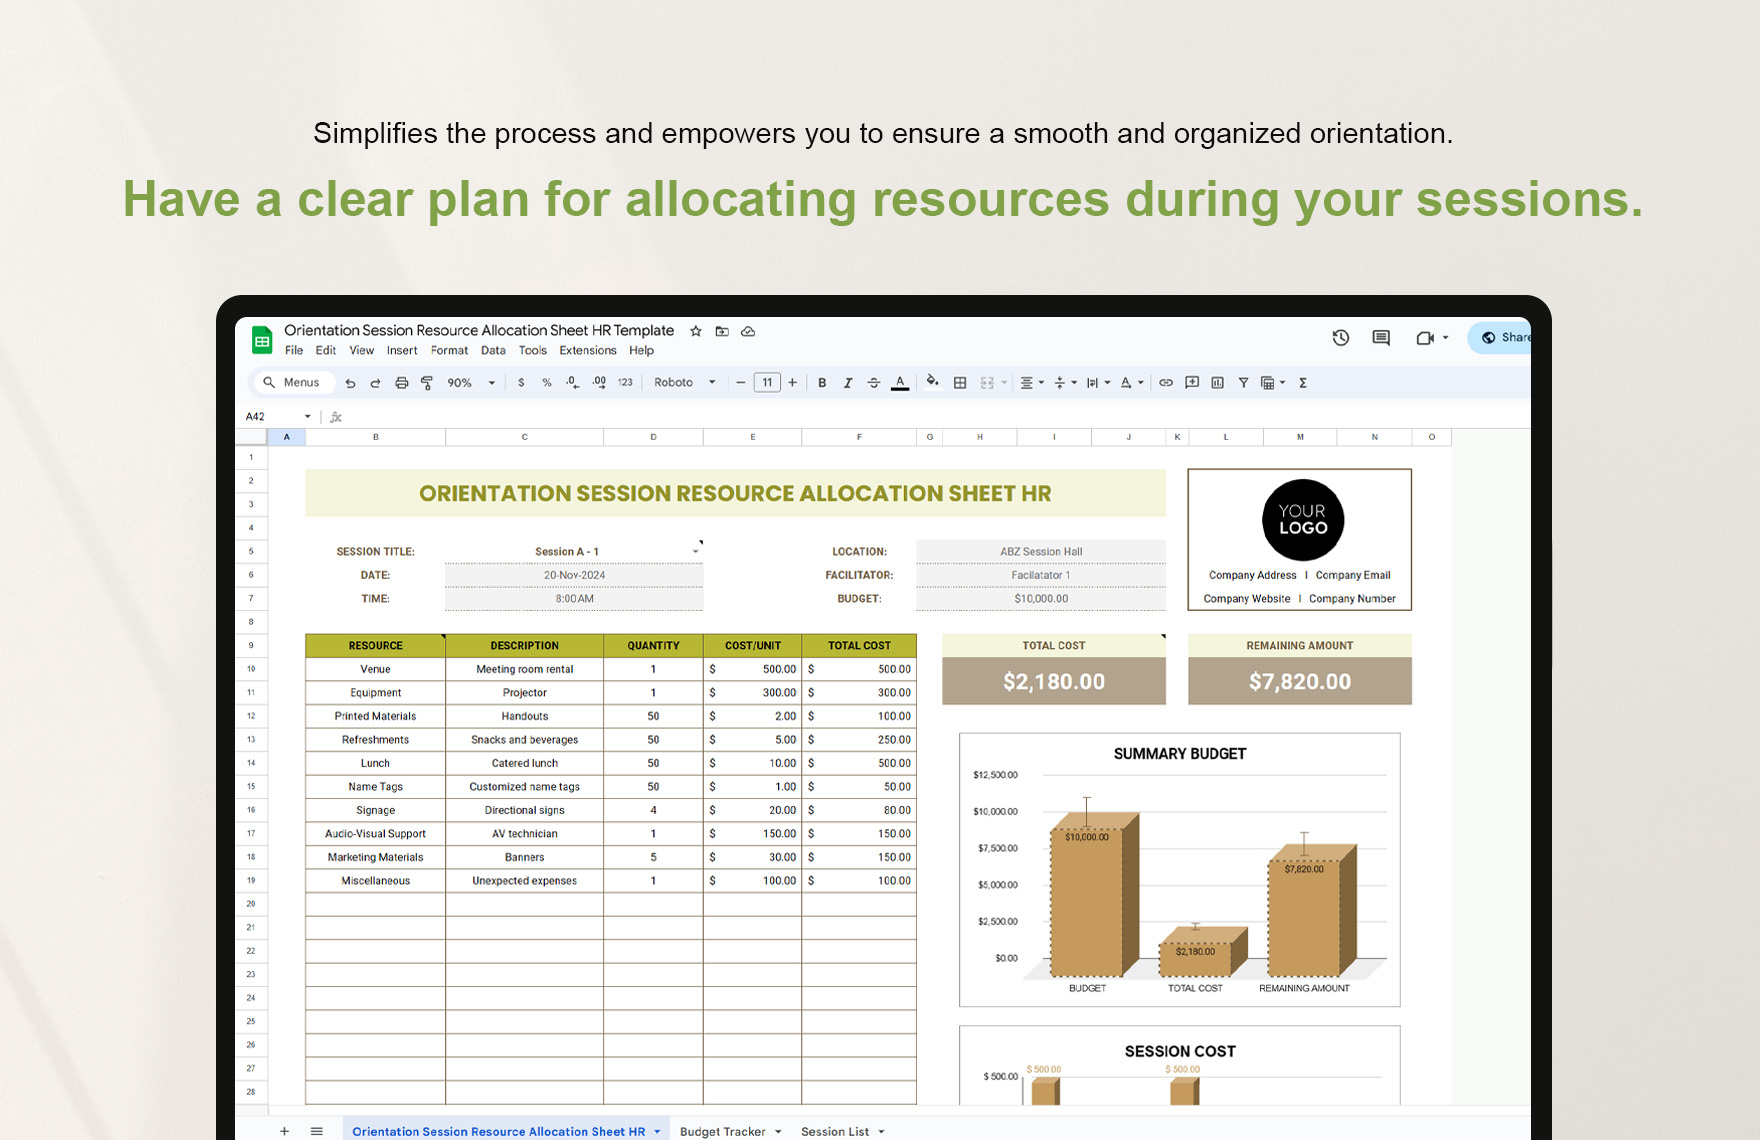 Orientation Session Resource Allocation Sheet HR Template